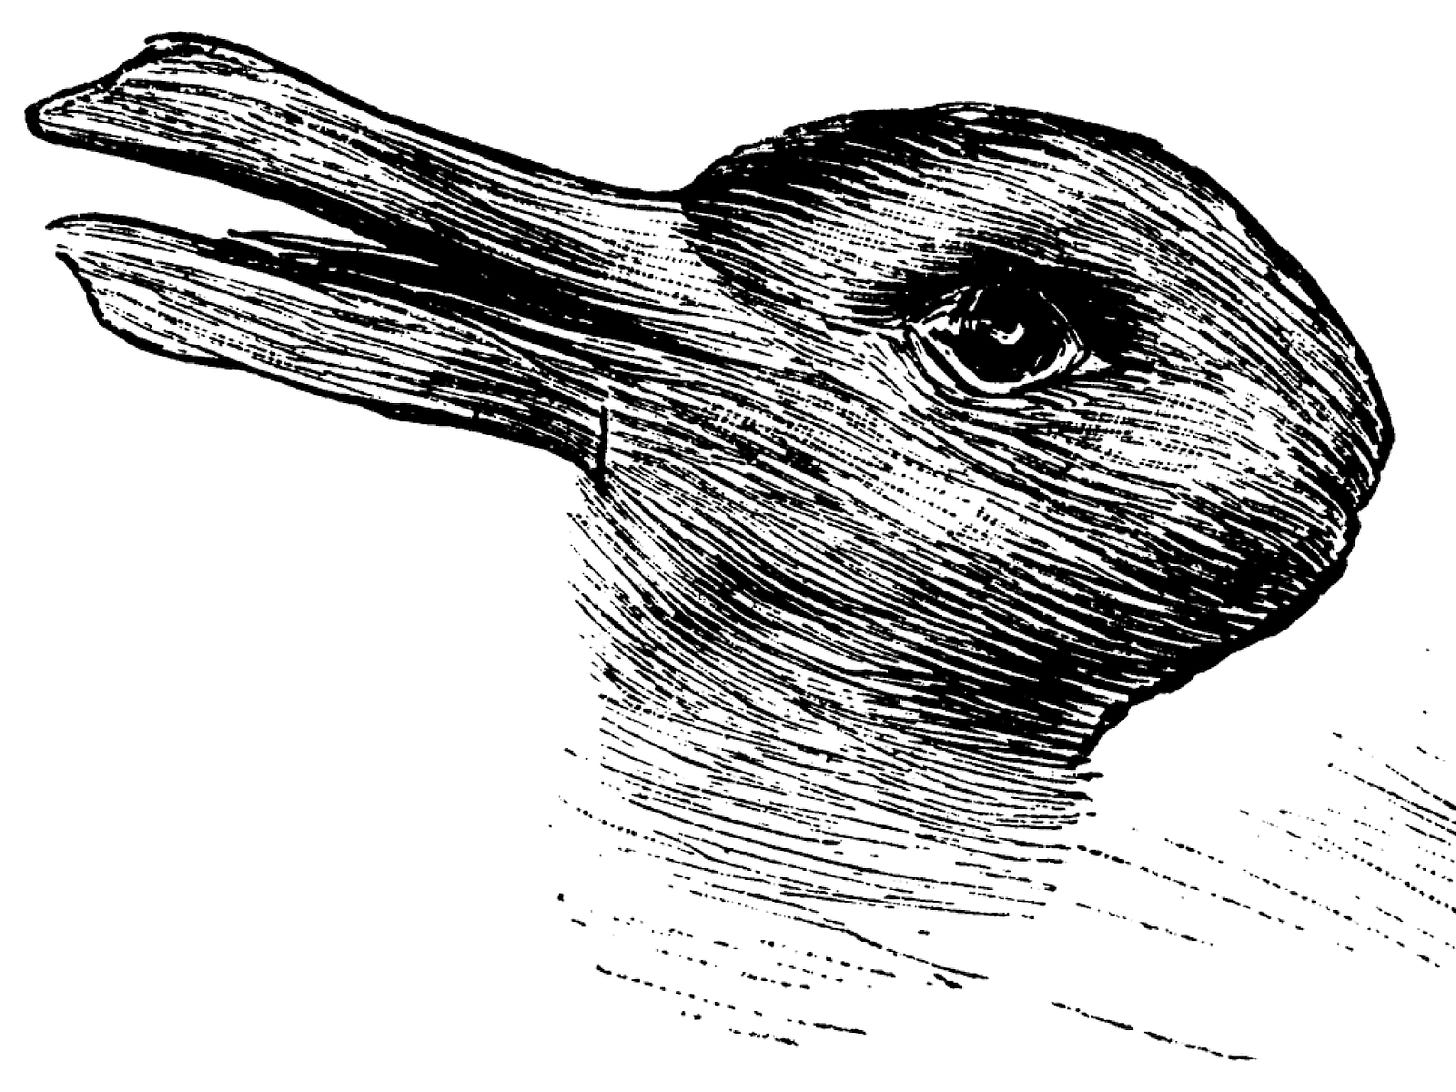 Famous drawing that can be seen as a duck or a rabbit. The rabbit's ears can be seen as a duck's bill.